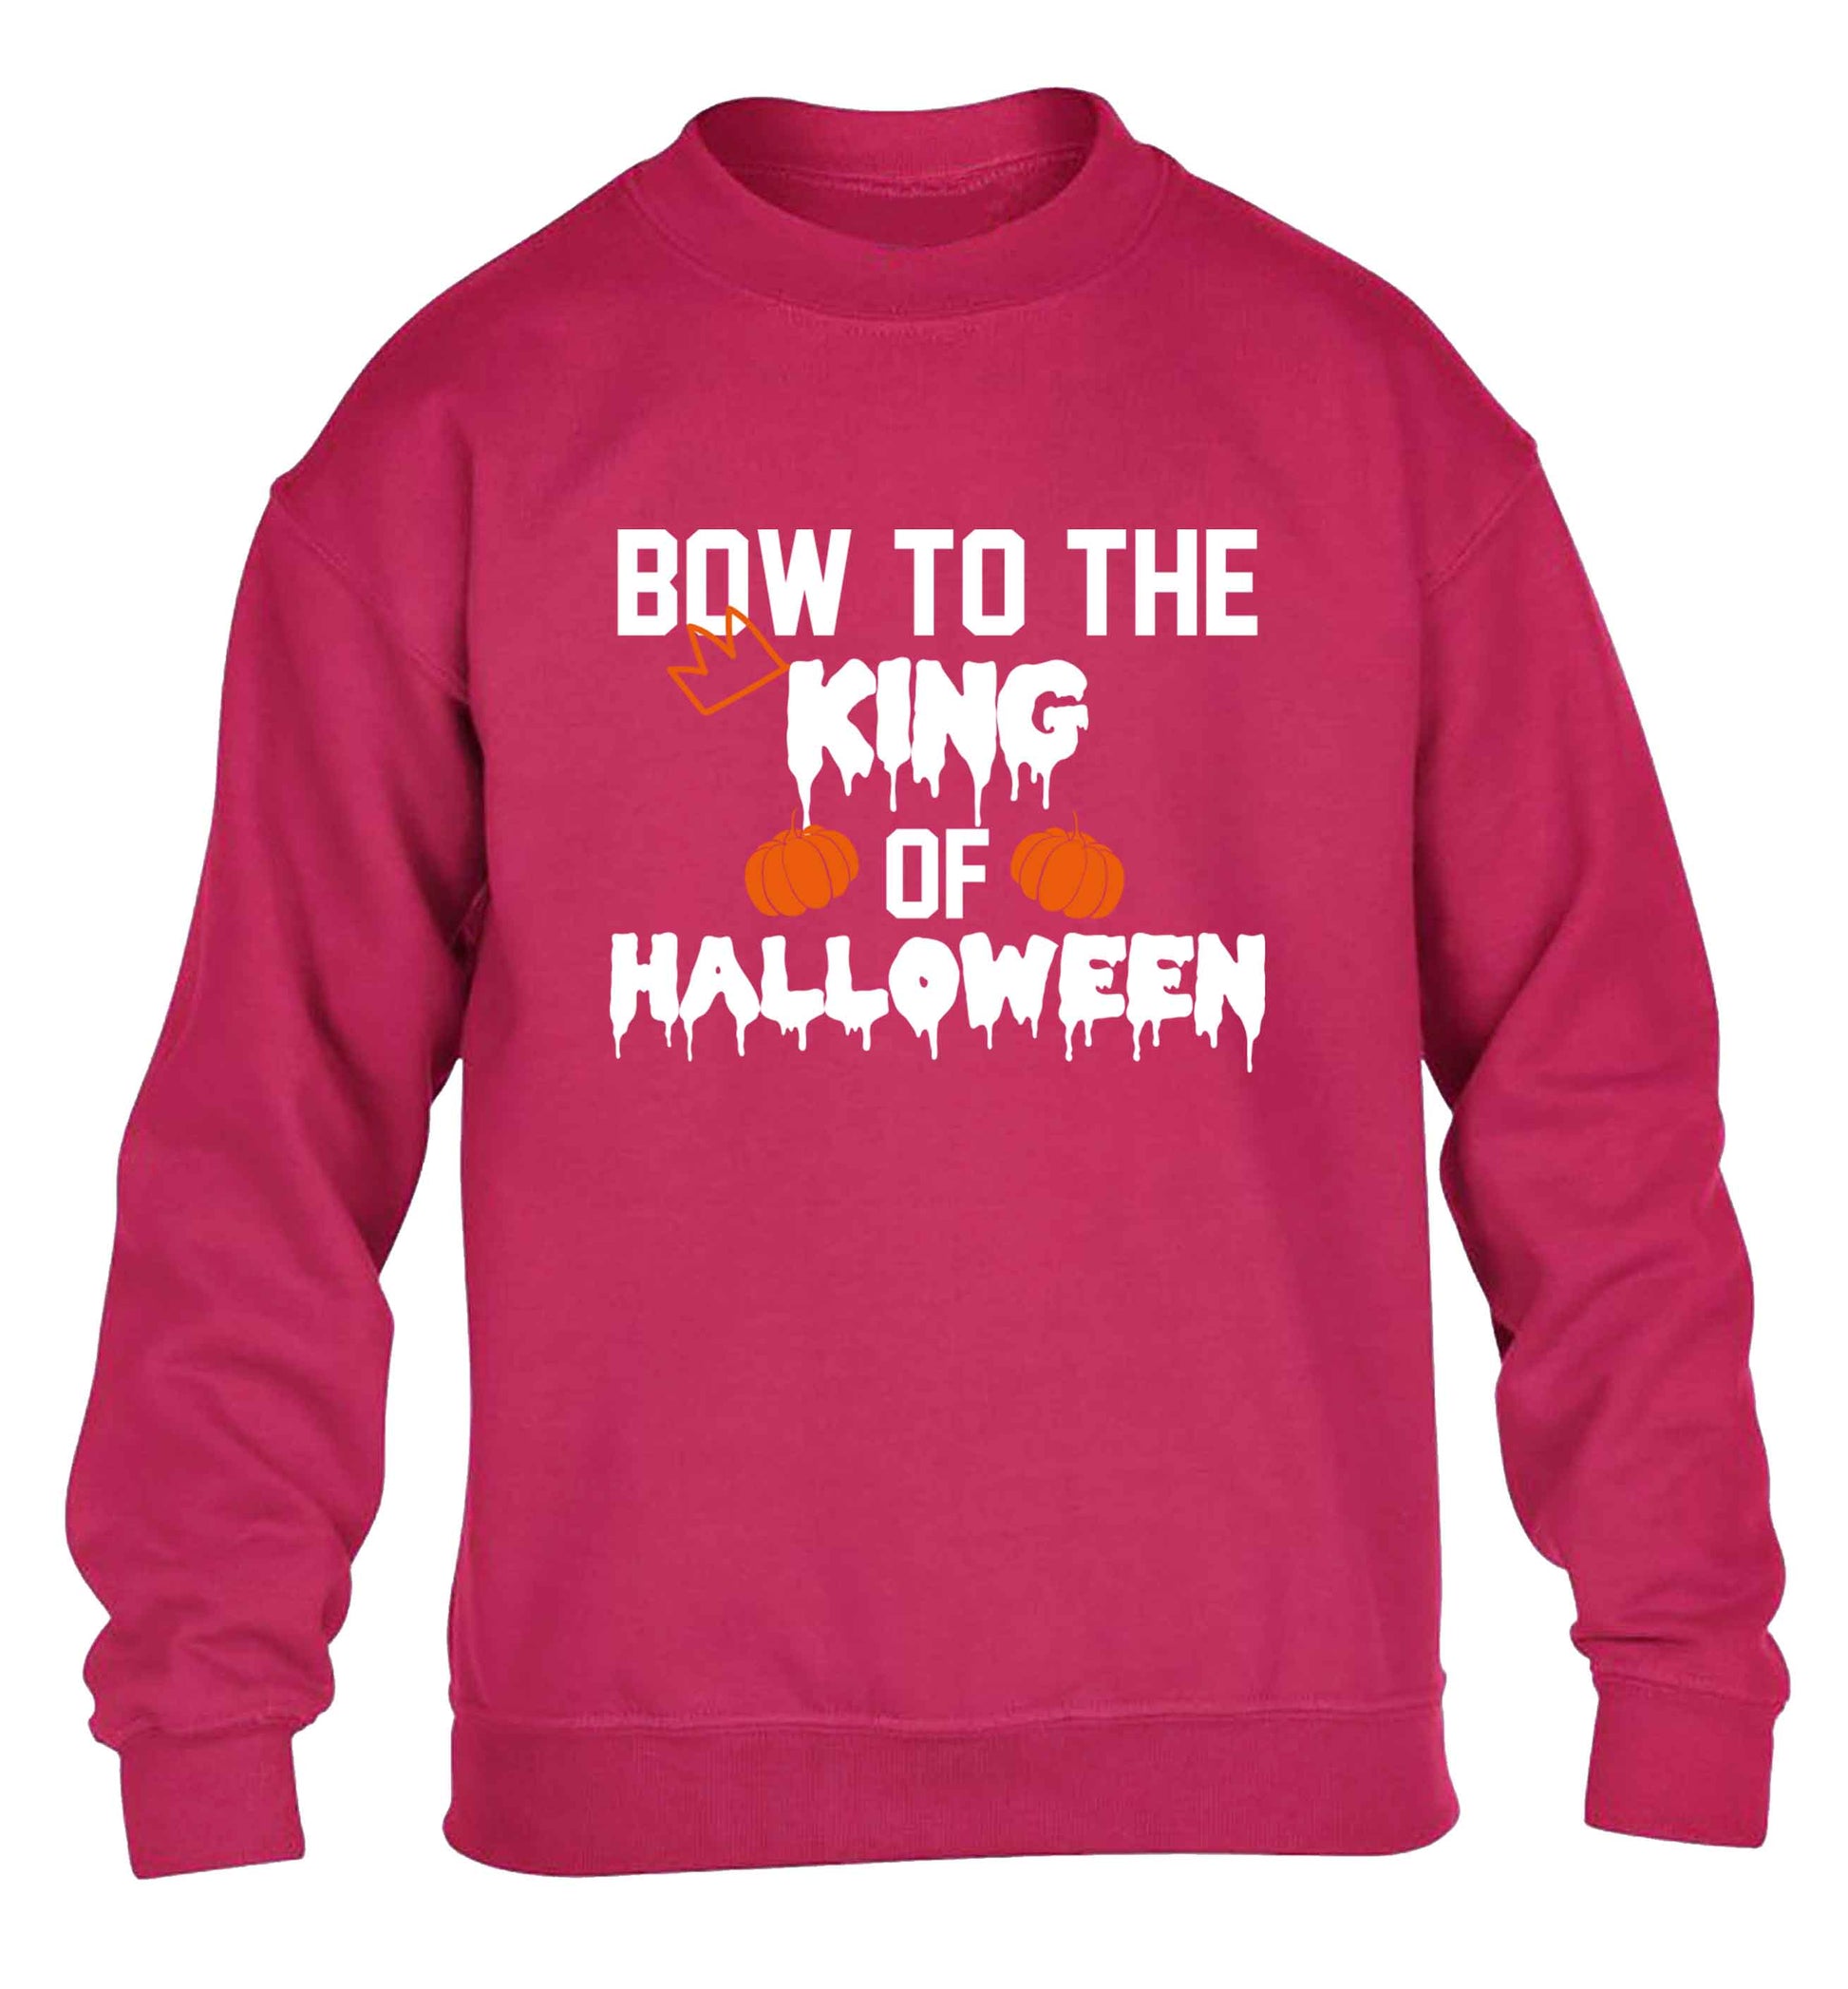 Bow to the King of halloween children's pink sweater 12-13 Years